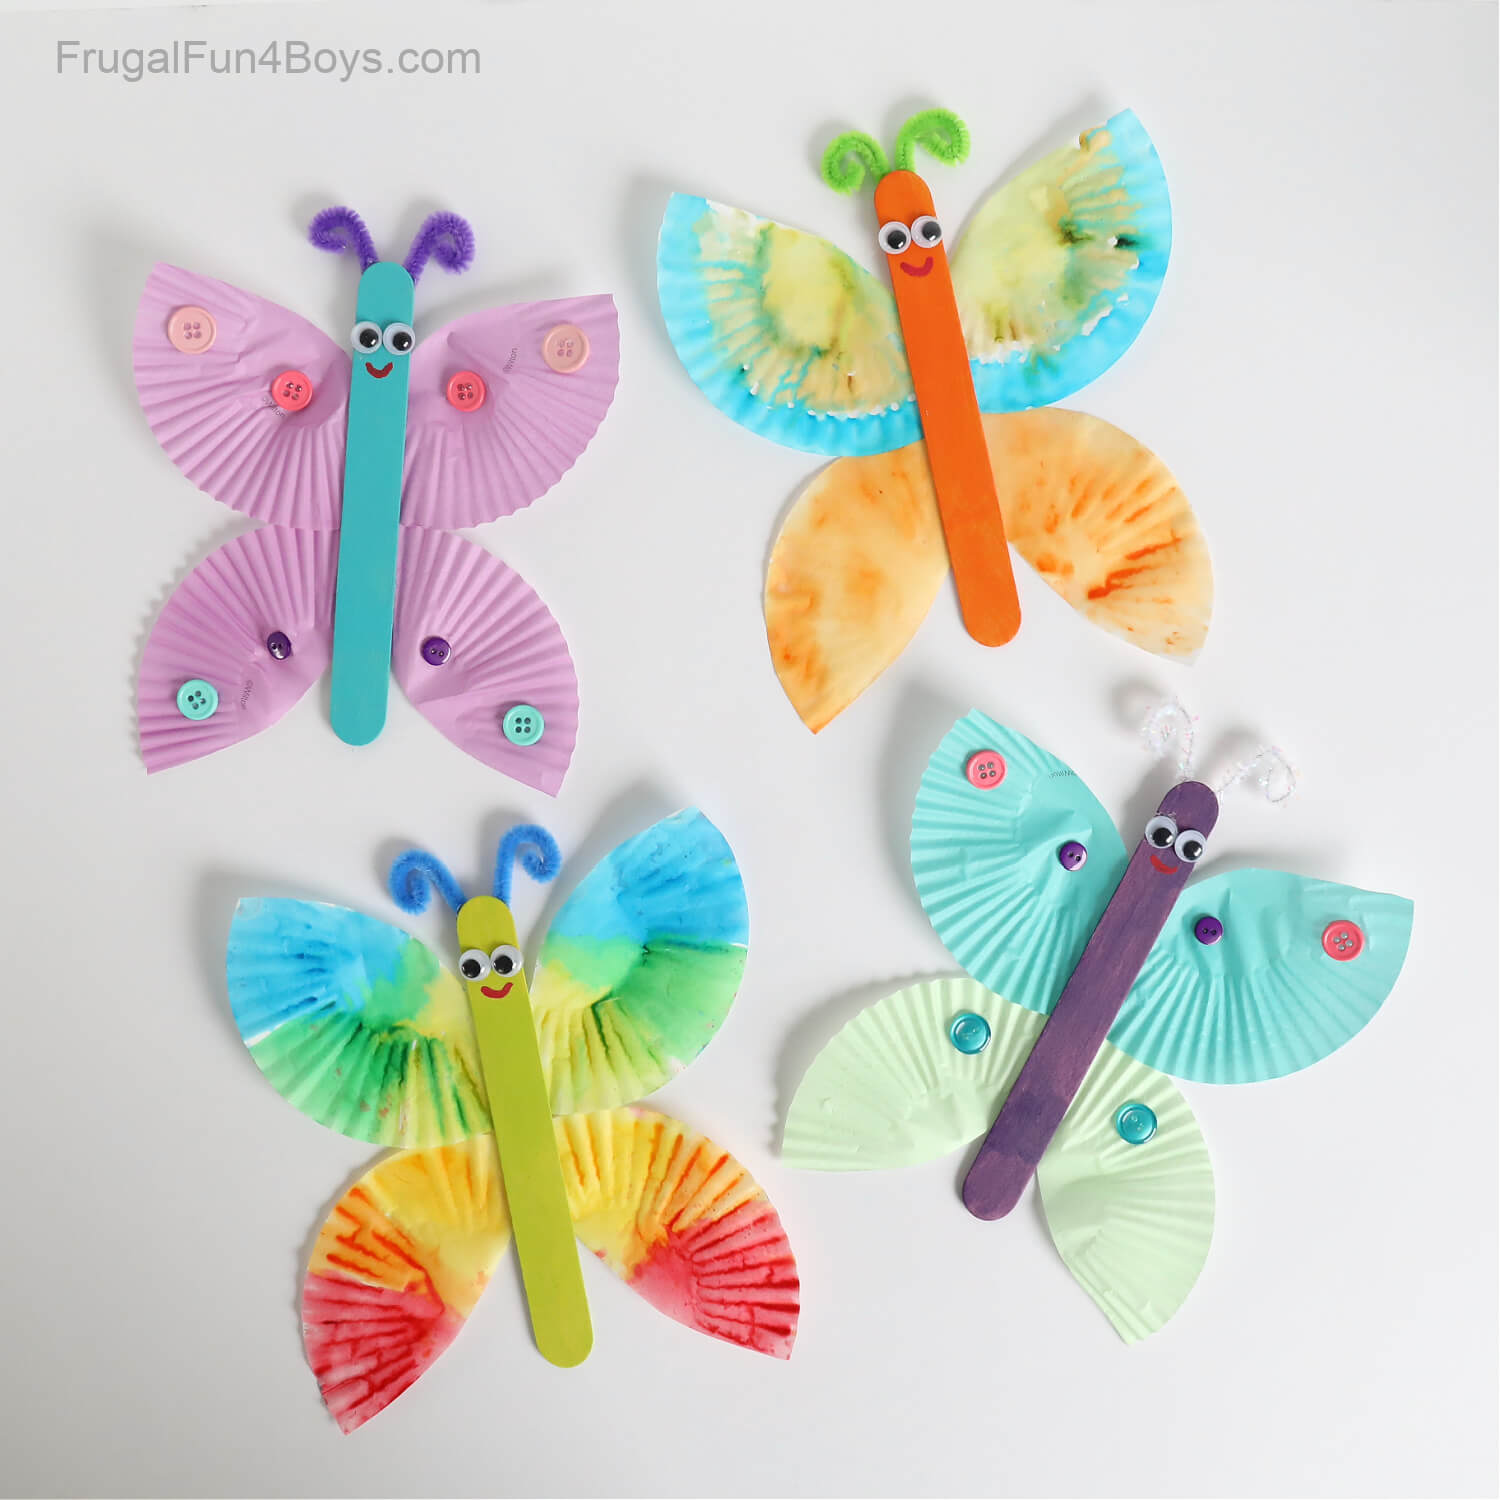 Cupcake Liners Butterflies Craft Using Popsicle Sticks, Buttons & Pipe Cleaners